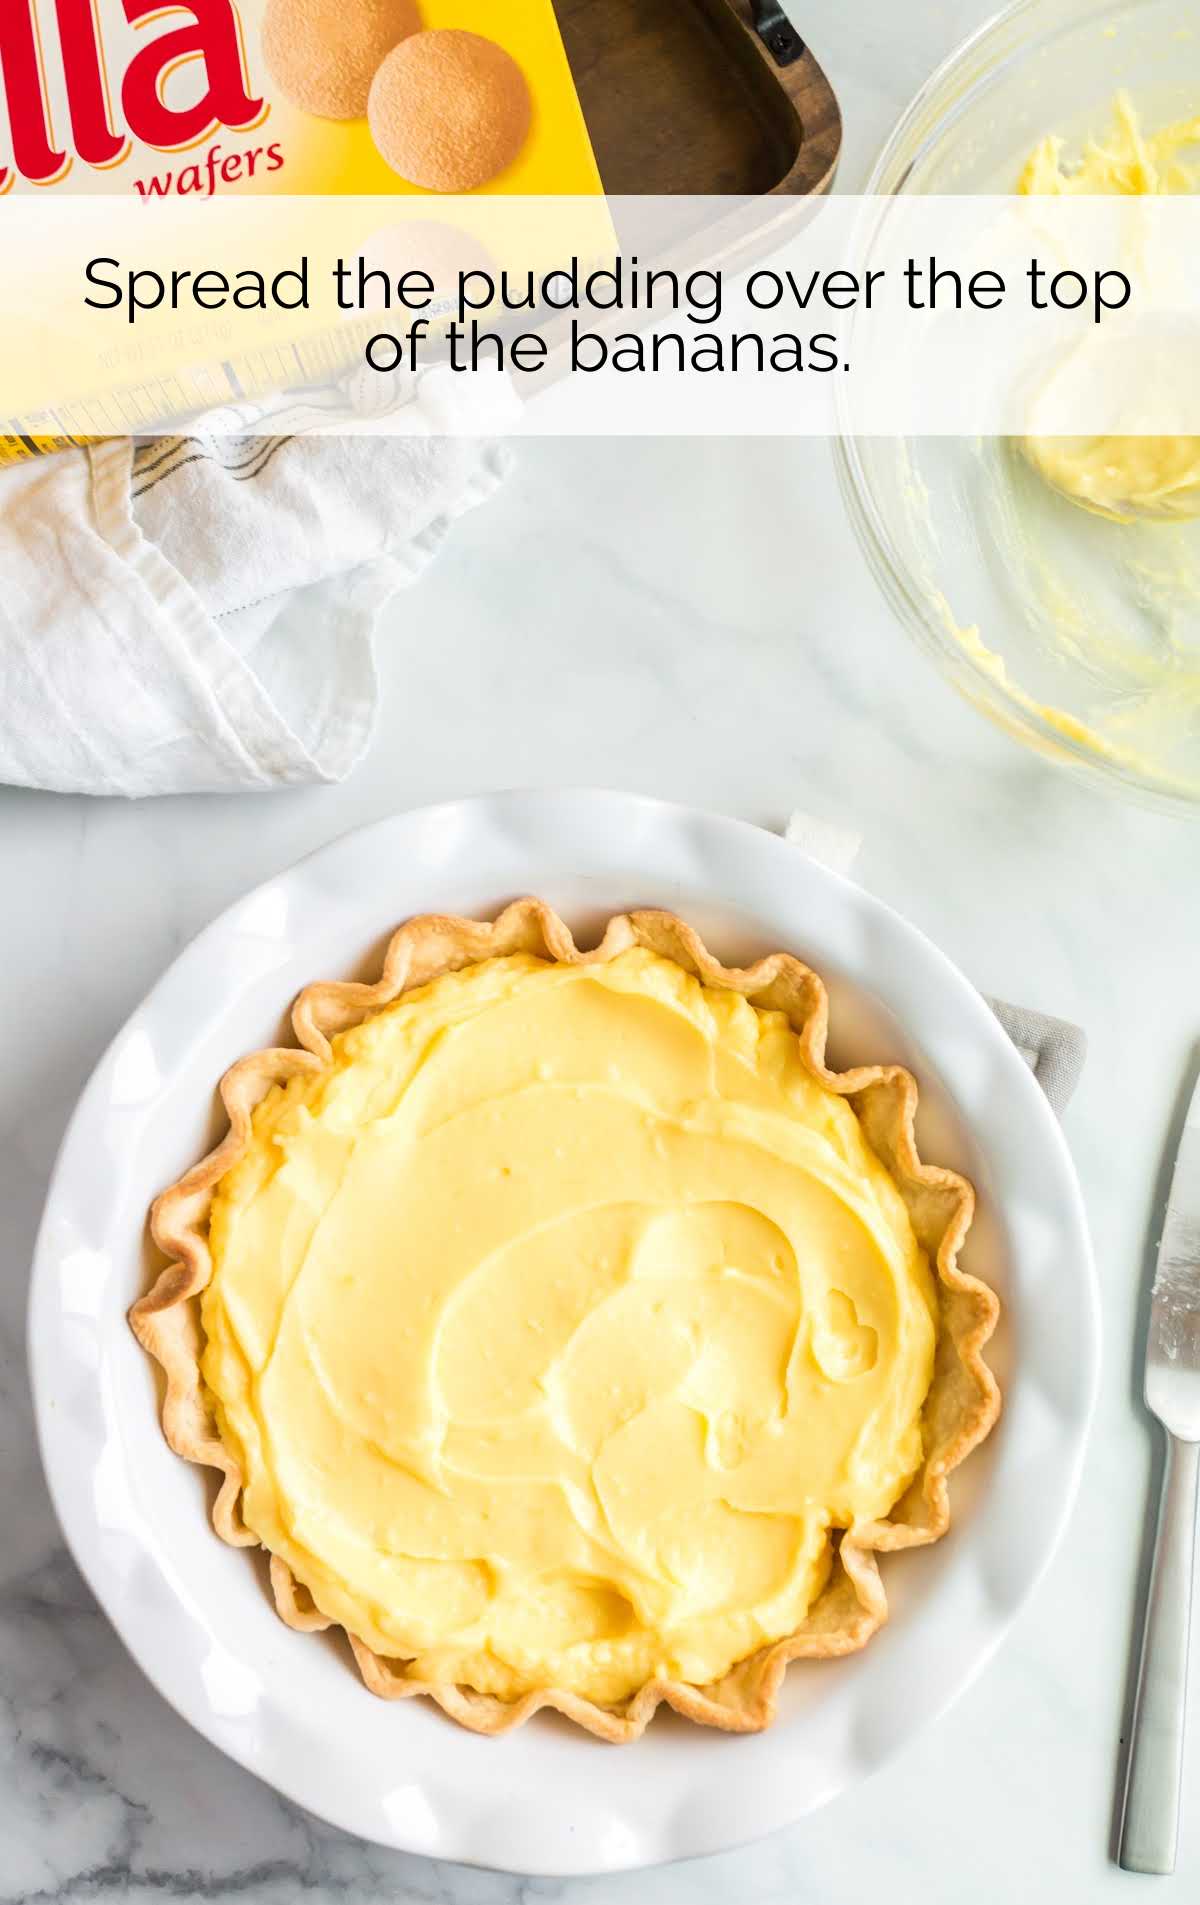 pudding spread over the top of the banana in a pie crust